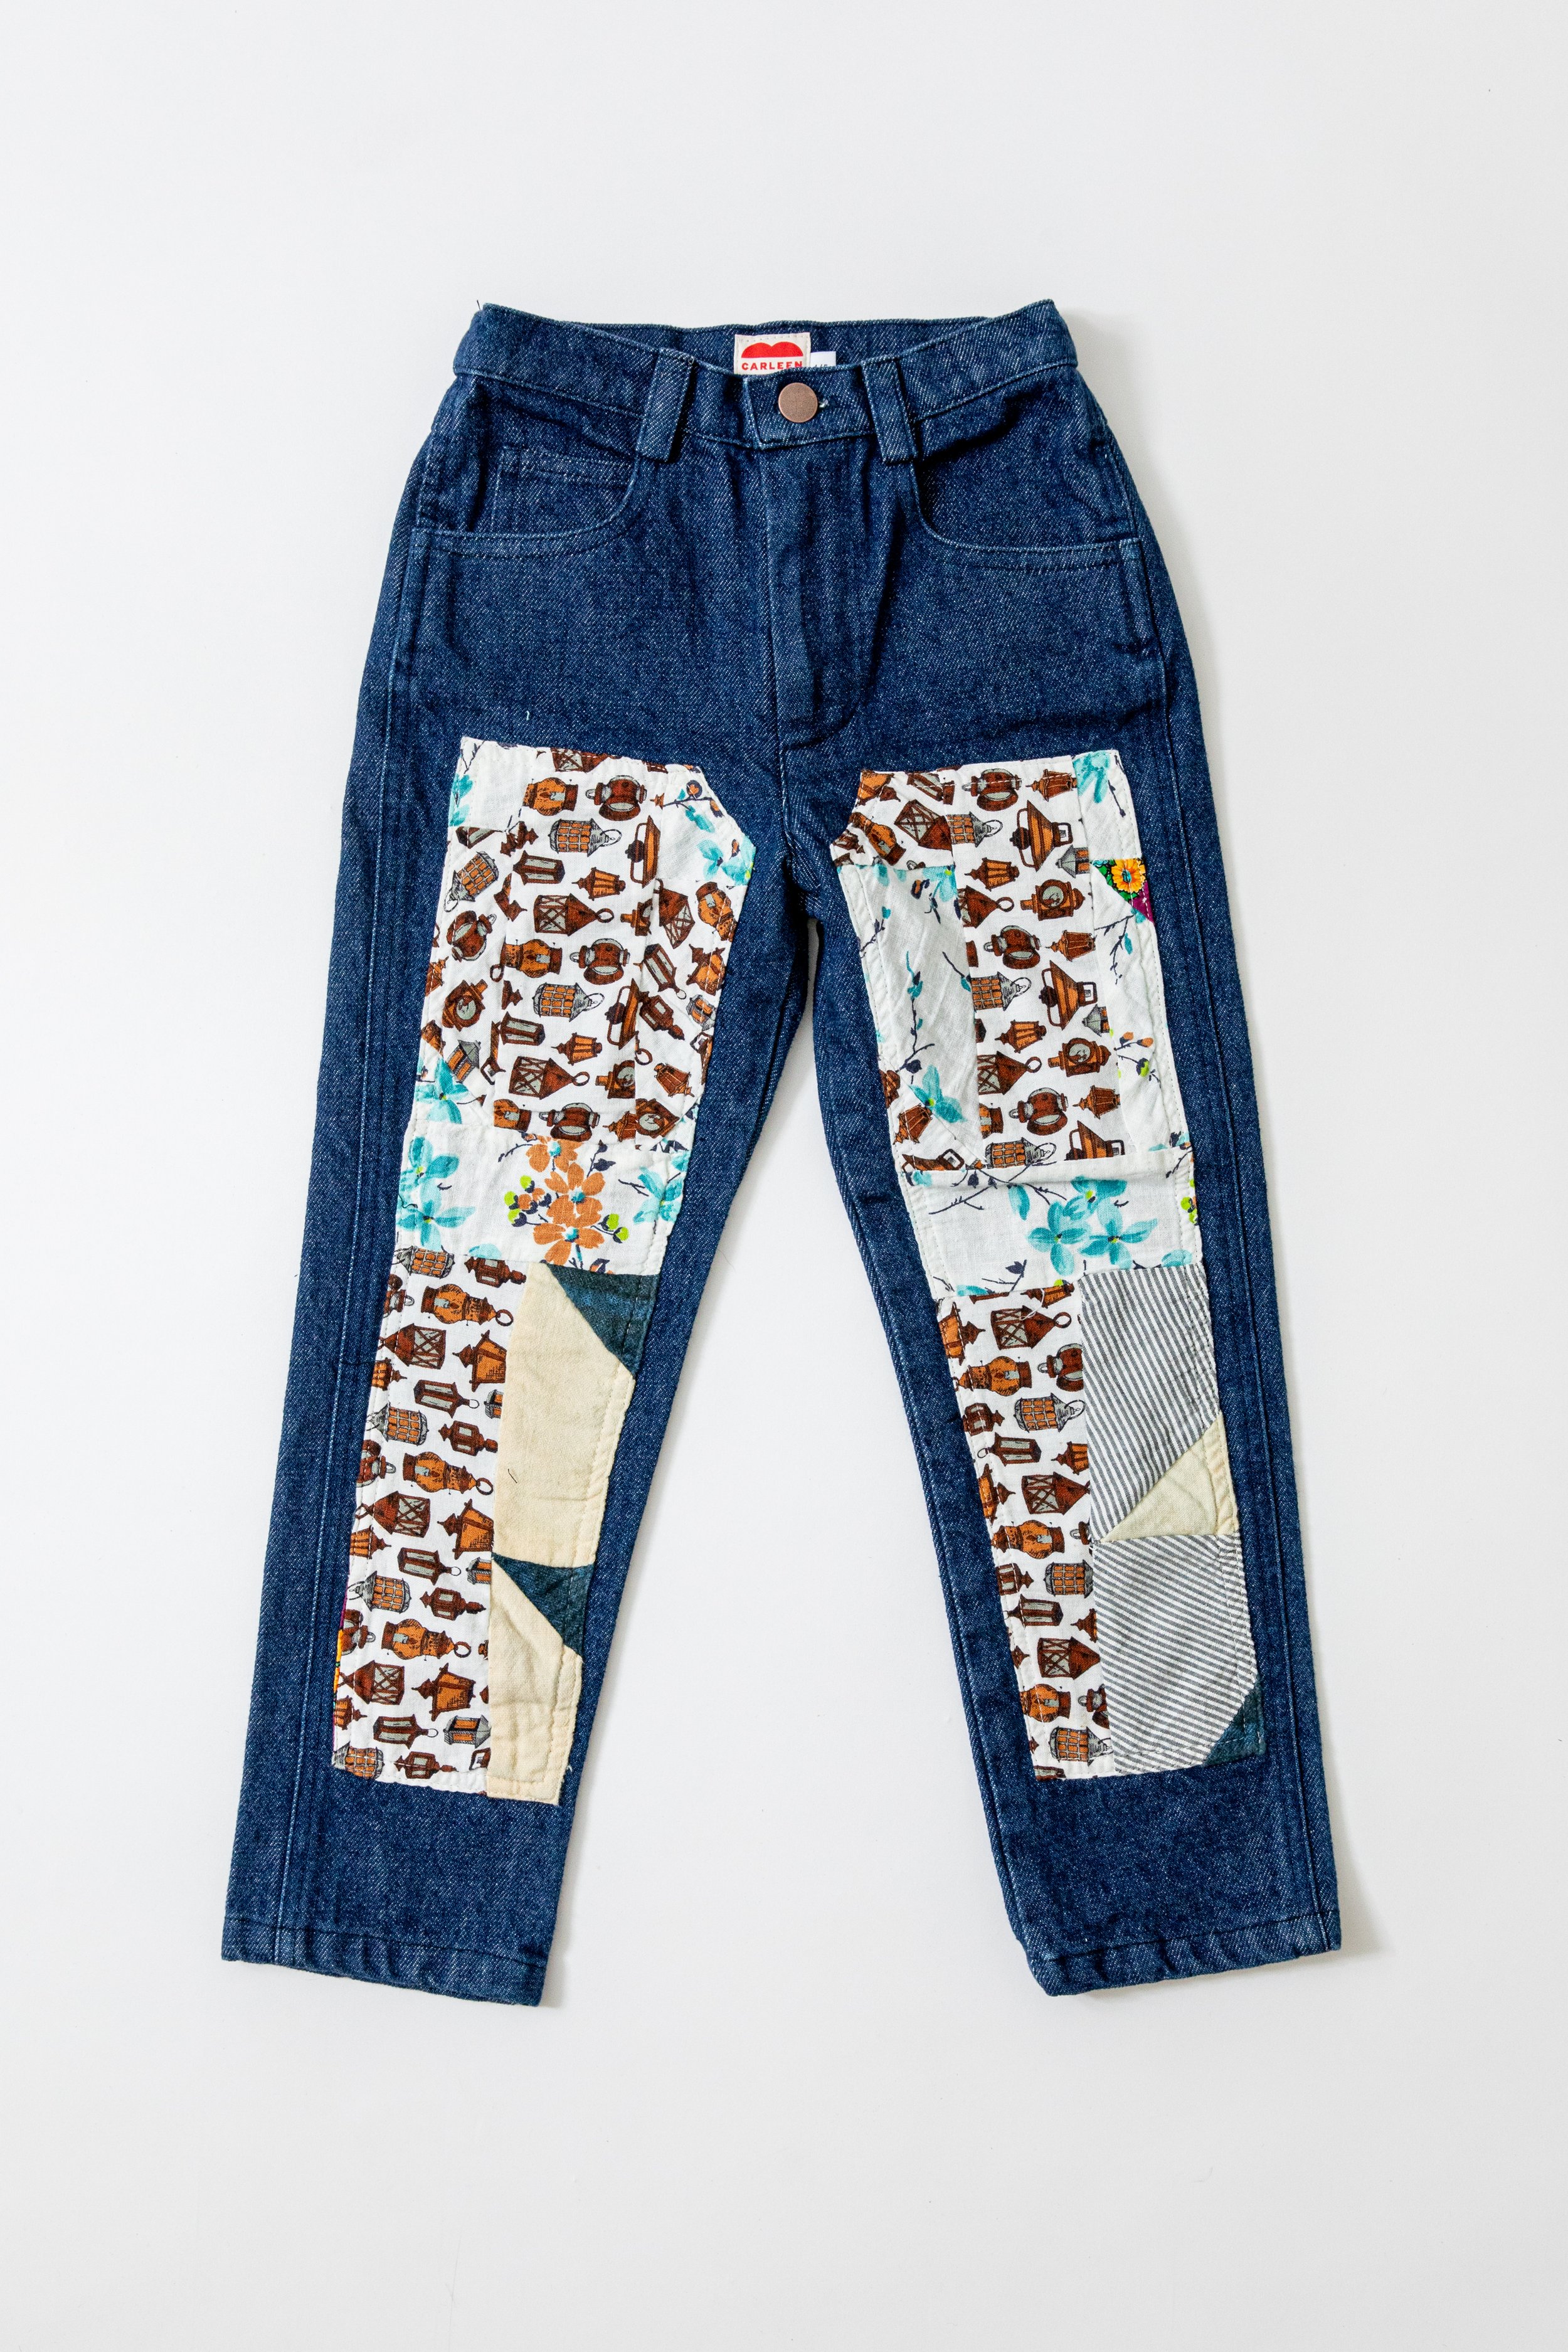 KIDS Patchwork Jeans- Triangles Size 2/3 and 4/5 — CARLEEN